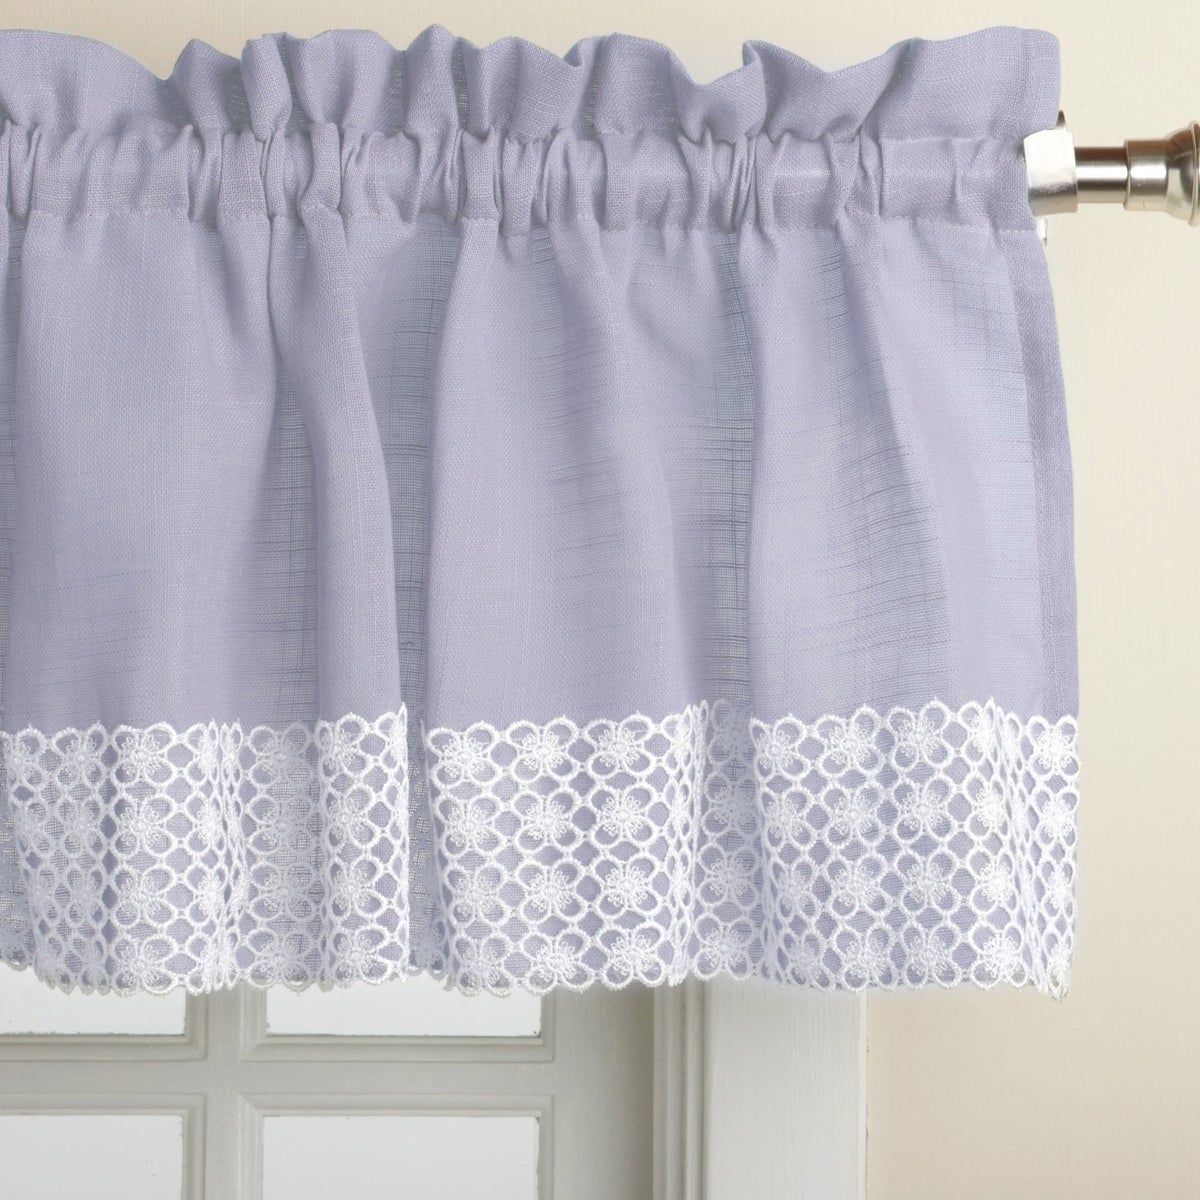 Blue Country Style Kitchen Curtains With White Daisy Lace Accent Pertaining To French Vanilla Country Style Curtain Parts With White Daisy Lace Accent (Photo 7 of 20)